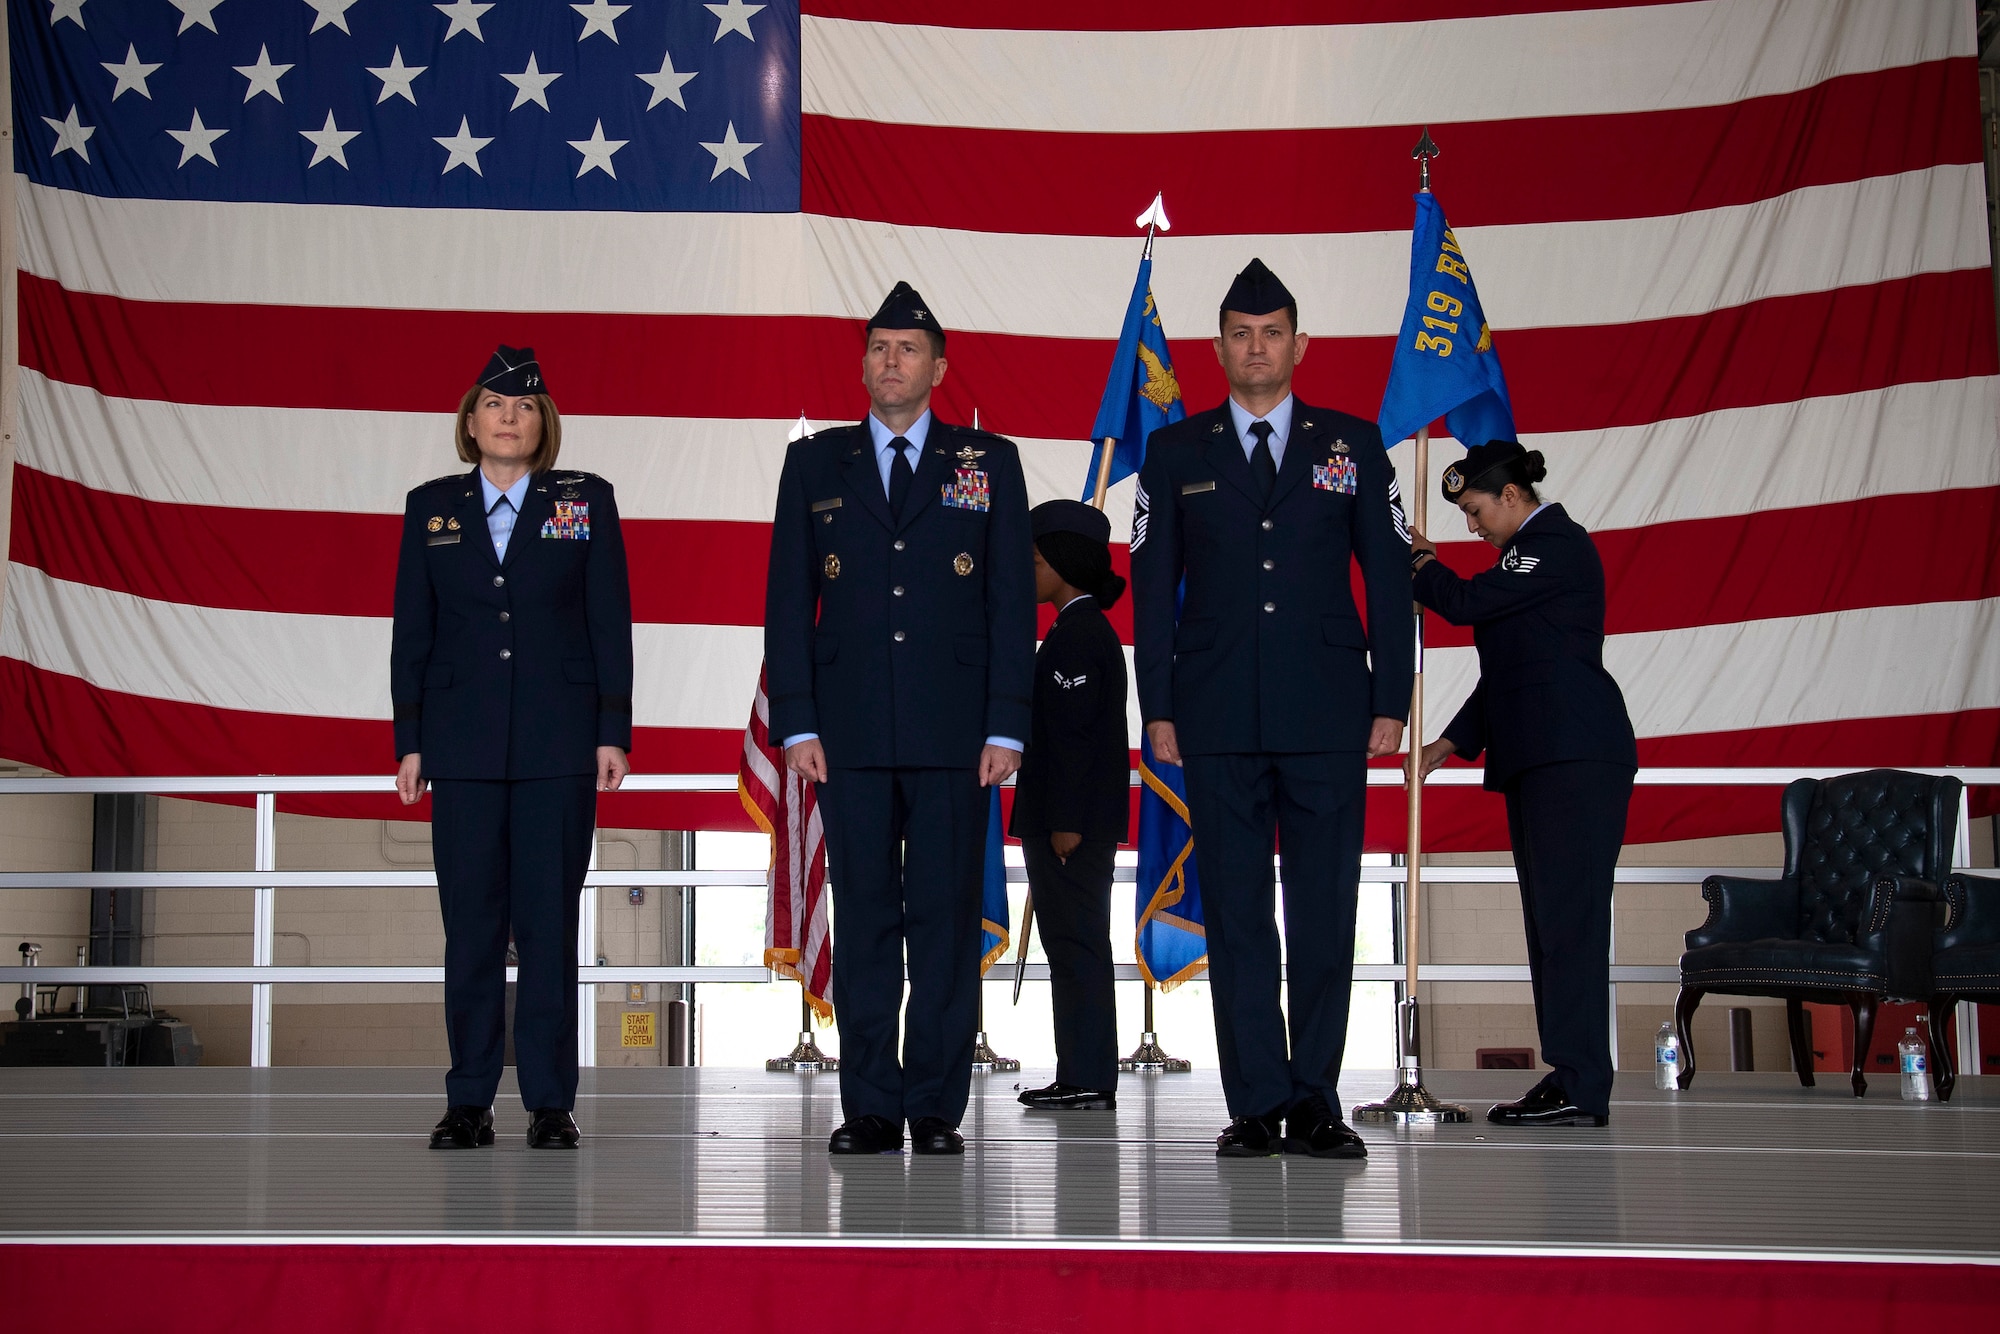 The 319th Reconnaissance Wing guidon replaces that of the 319th Air Base Wing June 28, 2019, on Grand Forks Air Force Base, North Dakota, officially marking the base’s main mission as reconnaissance.